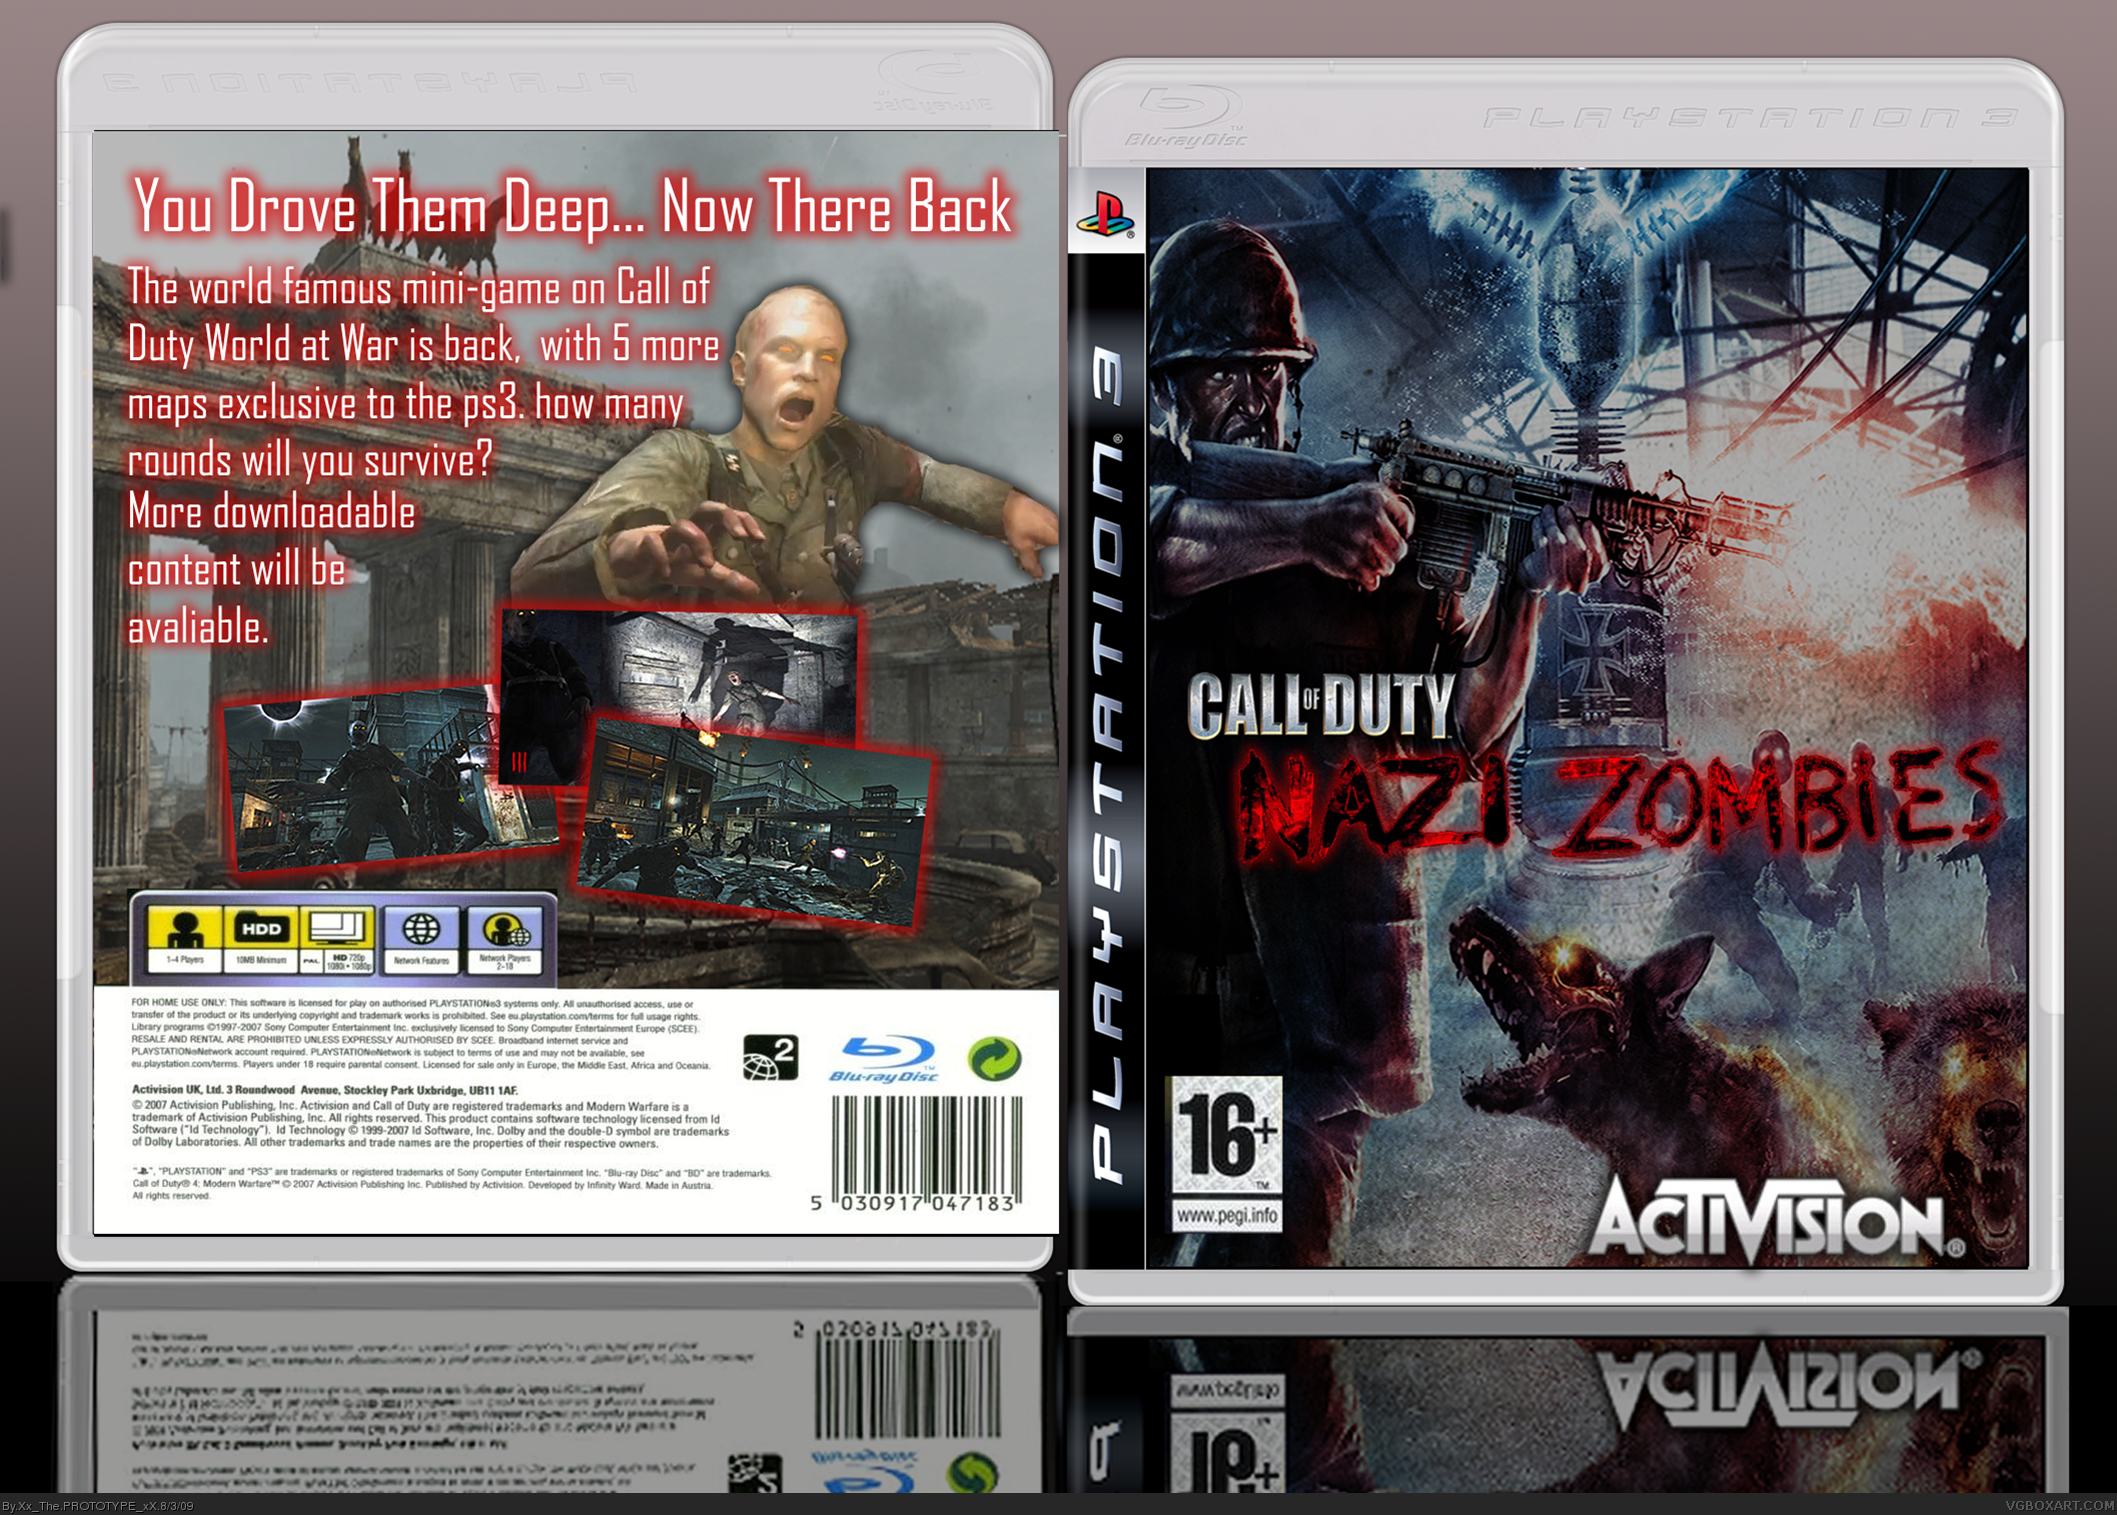 Call of Duty Nazi Zombies box cover